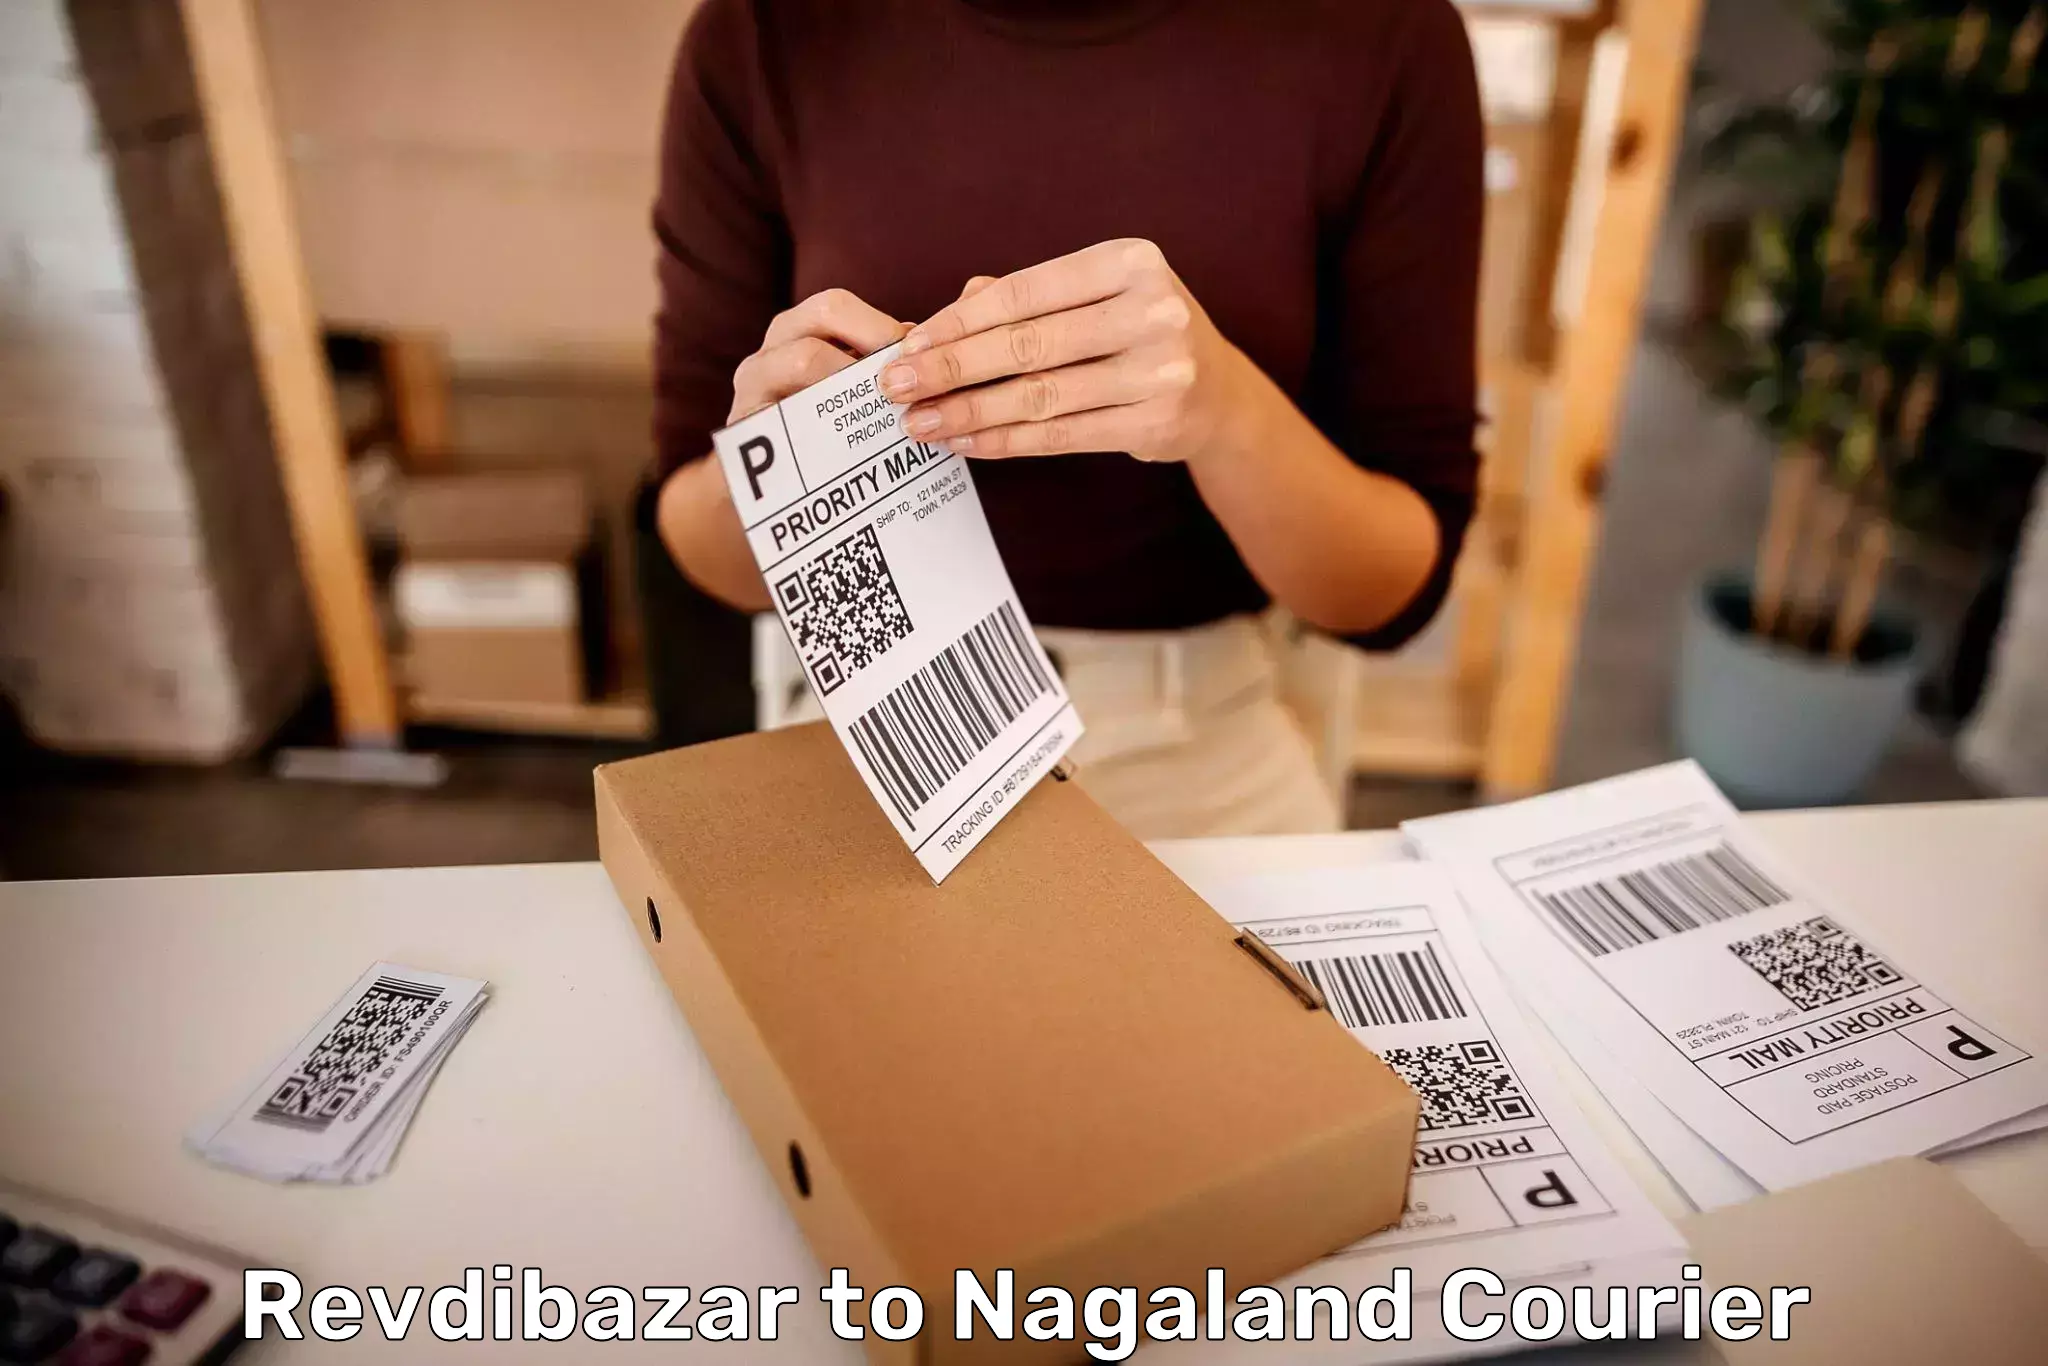 Efficient luggage delivery Revdibazar to Nagaland